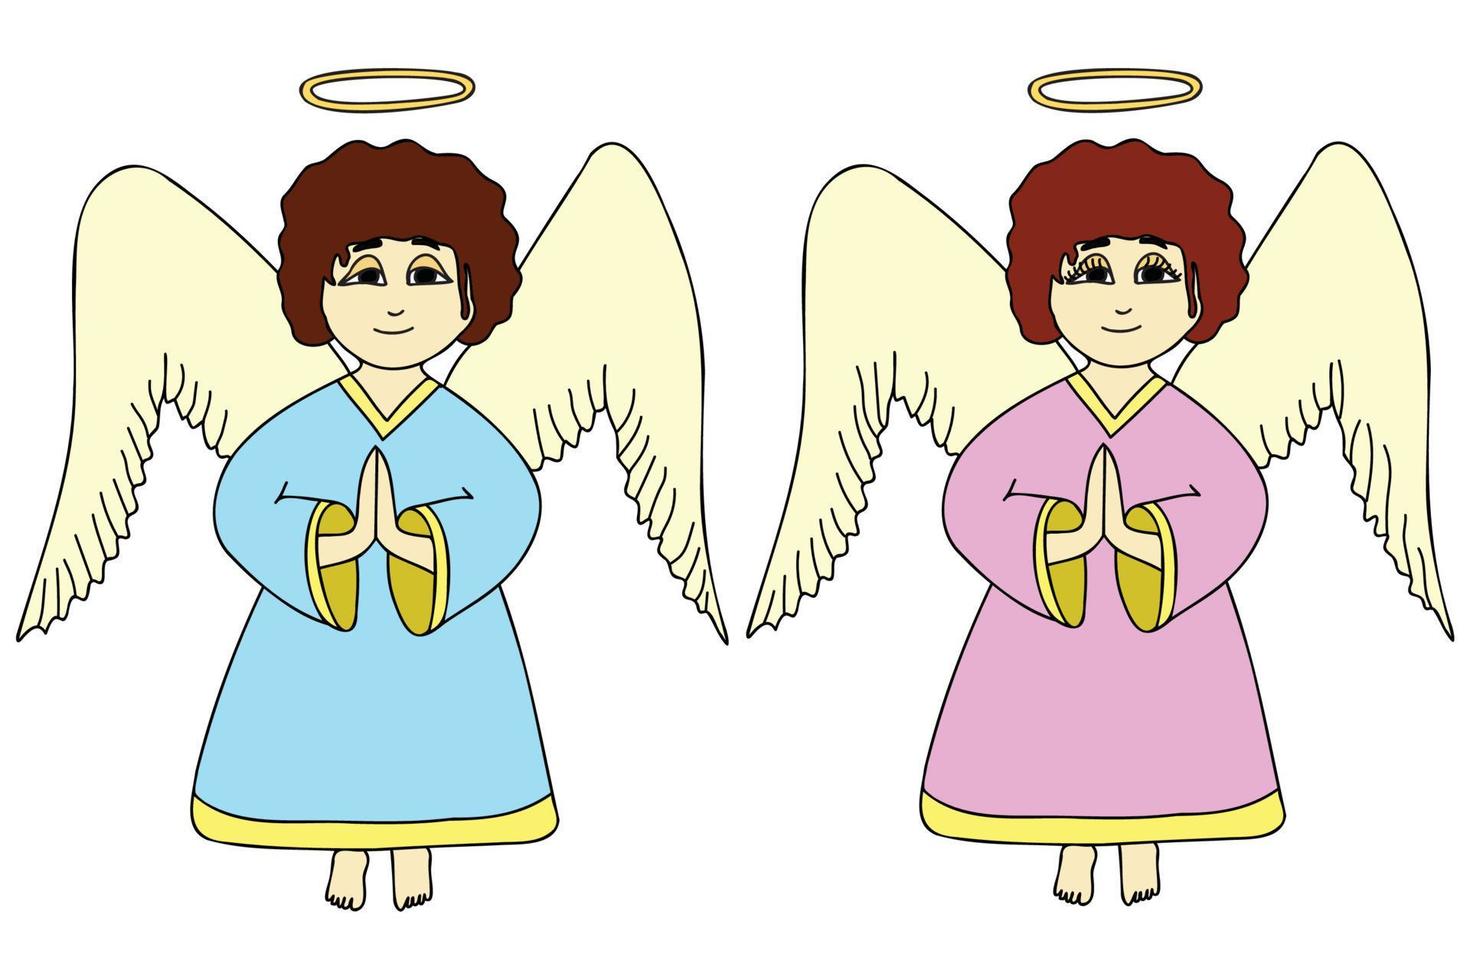 The picture shows two angels, a girl and a boy, it is intended for New Year, cards, Christmas, Valentine, clothes printing and you can use it in different occasions. vector